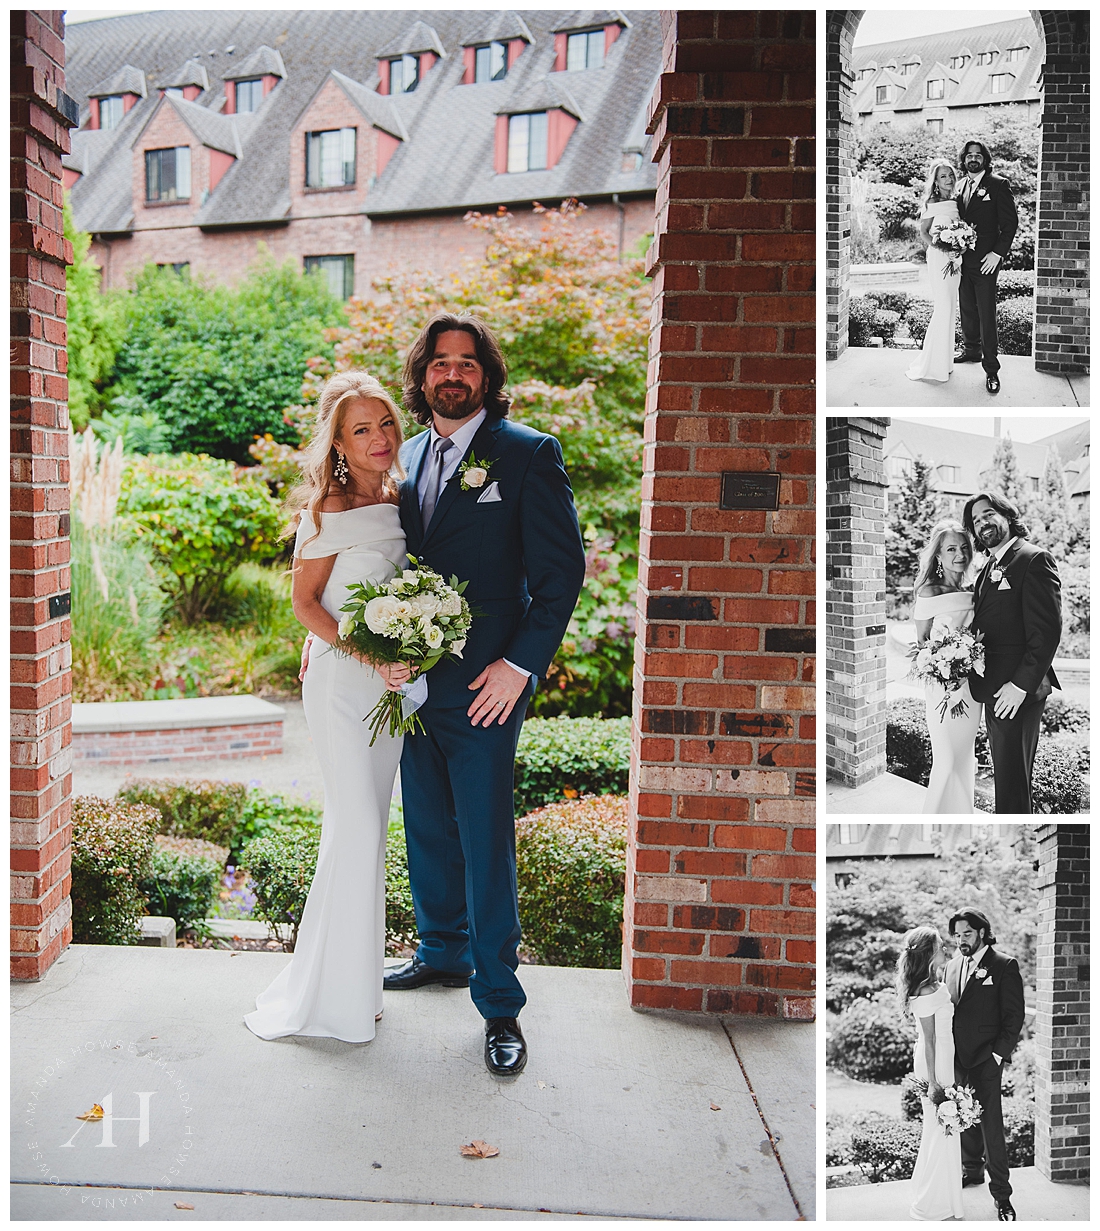 Elegant Fall Wedding | Bride and Groom Portraits with Brick Accented Background | Photographed by the Best Tacoma Wedding Photographer Amanda Howse Photography